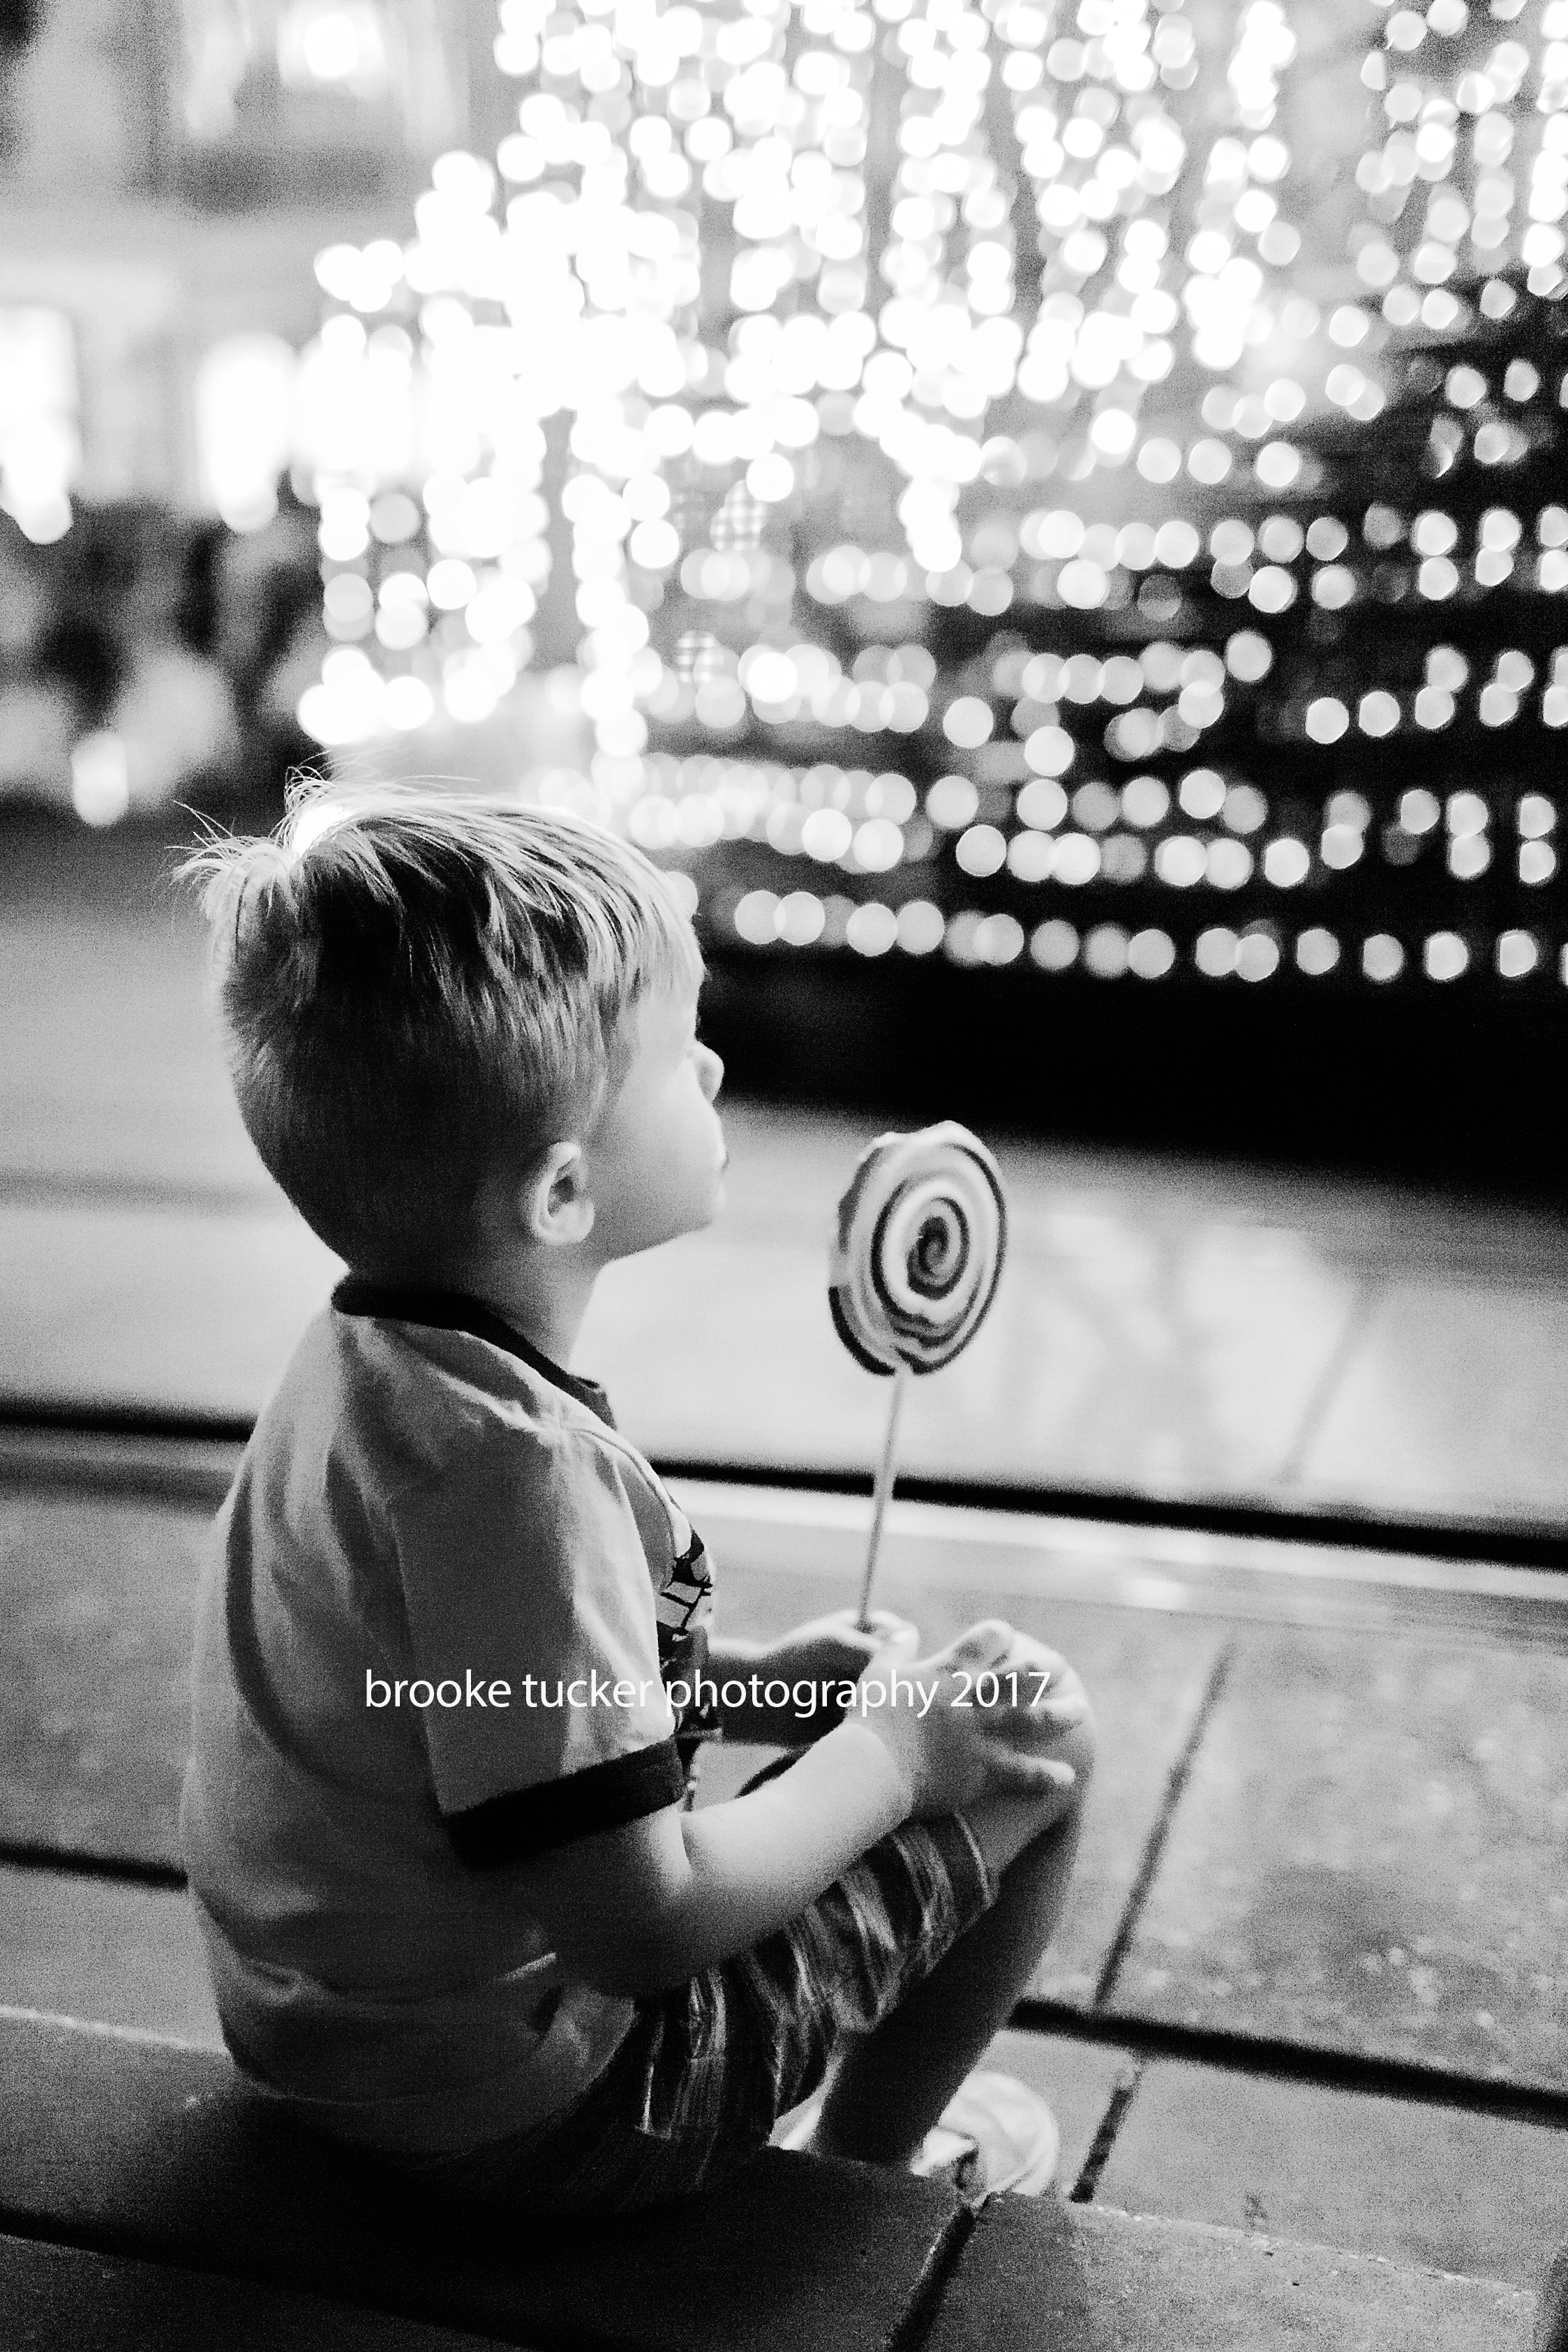 6 things to remember when photographing boys | brooke tucker photography